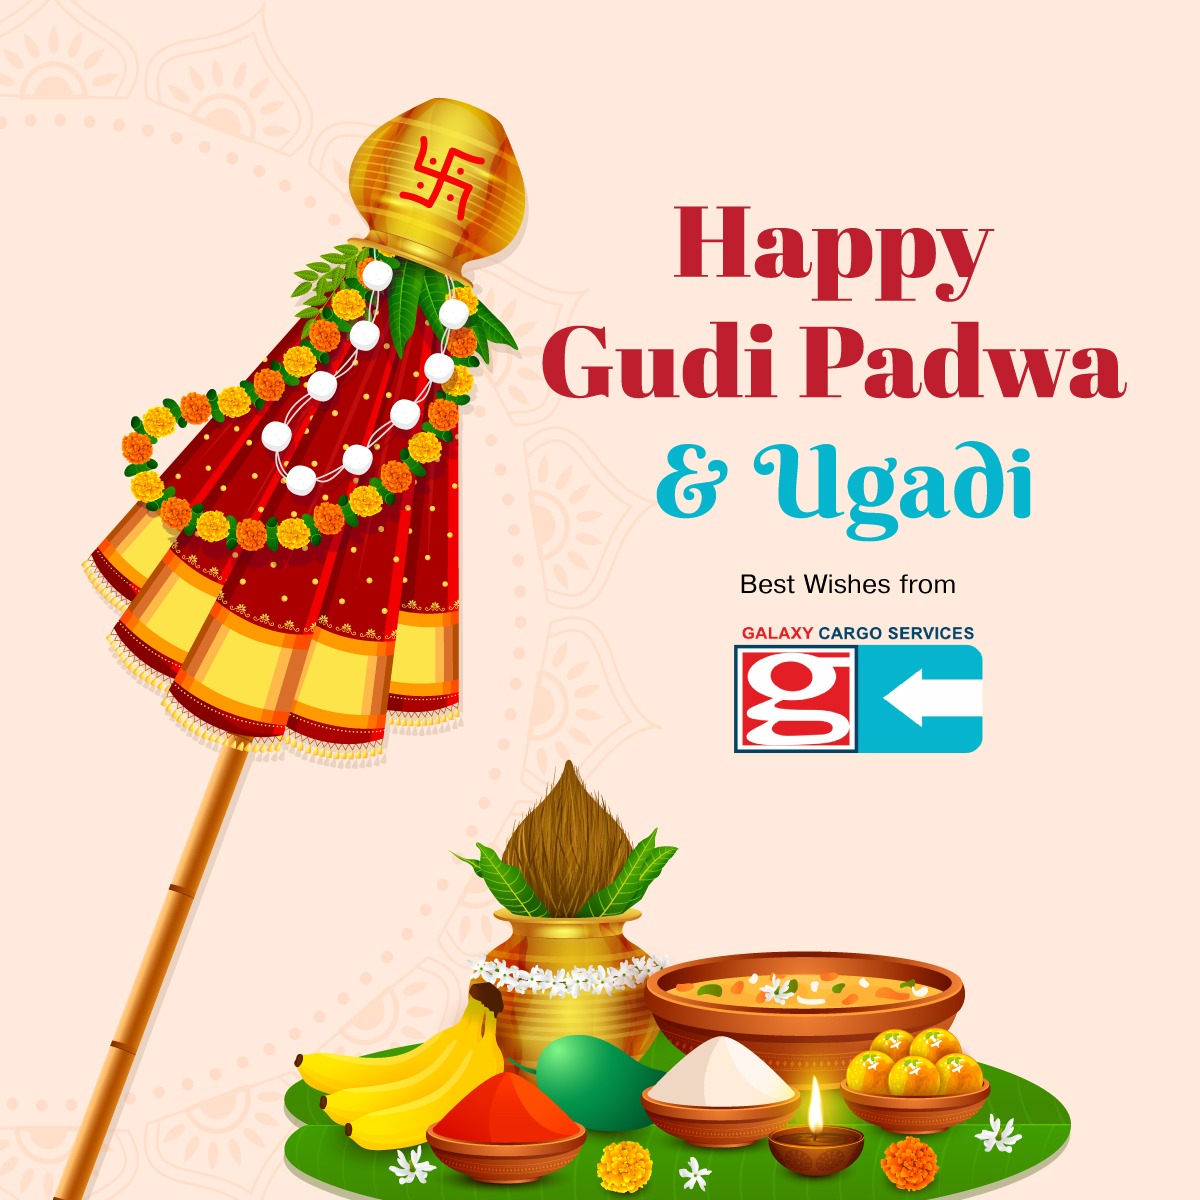 Wishing everyone a happy Gudi Padwa and Ugadi! May this new year bring happiness, prosperity, and success.

#galaxycargoservices #cargoservices #airfreight #aircargologistics #seafreight #logistics #freightservices #GudiPadwa #Ugadi #celebration